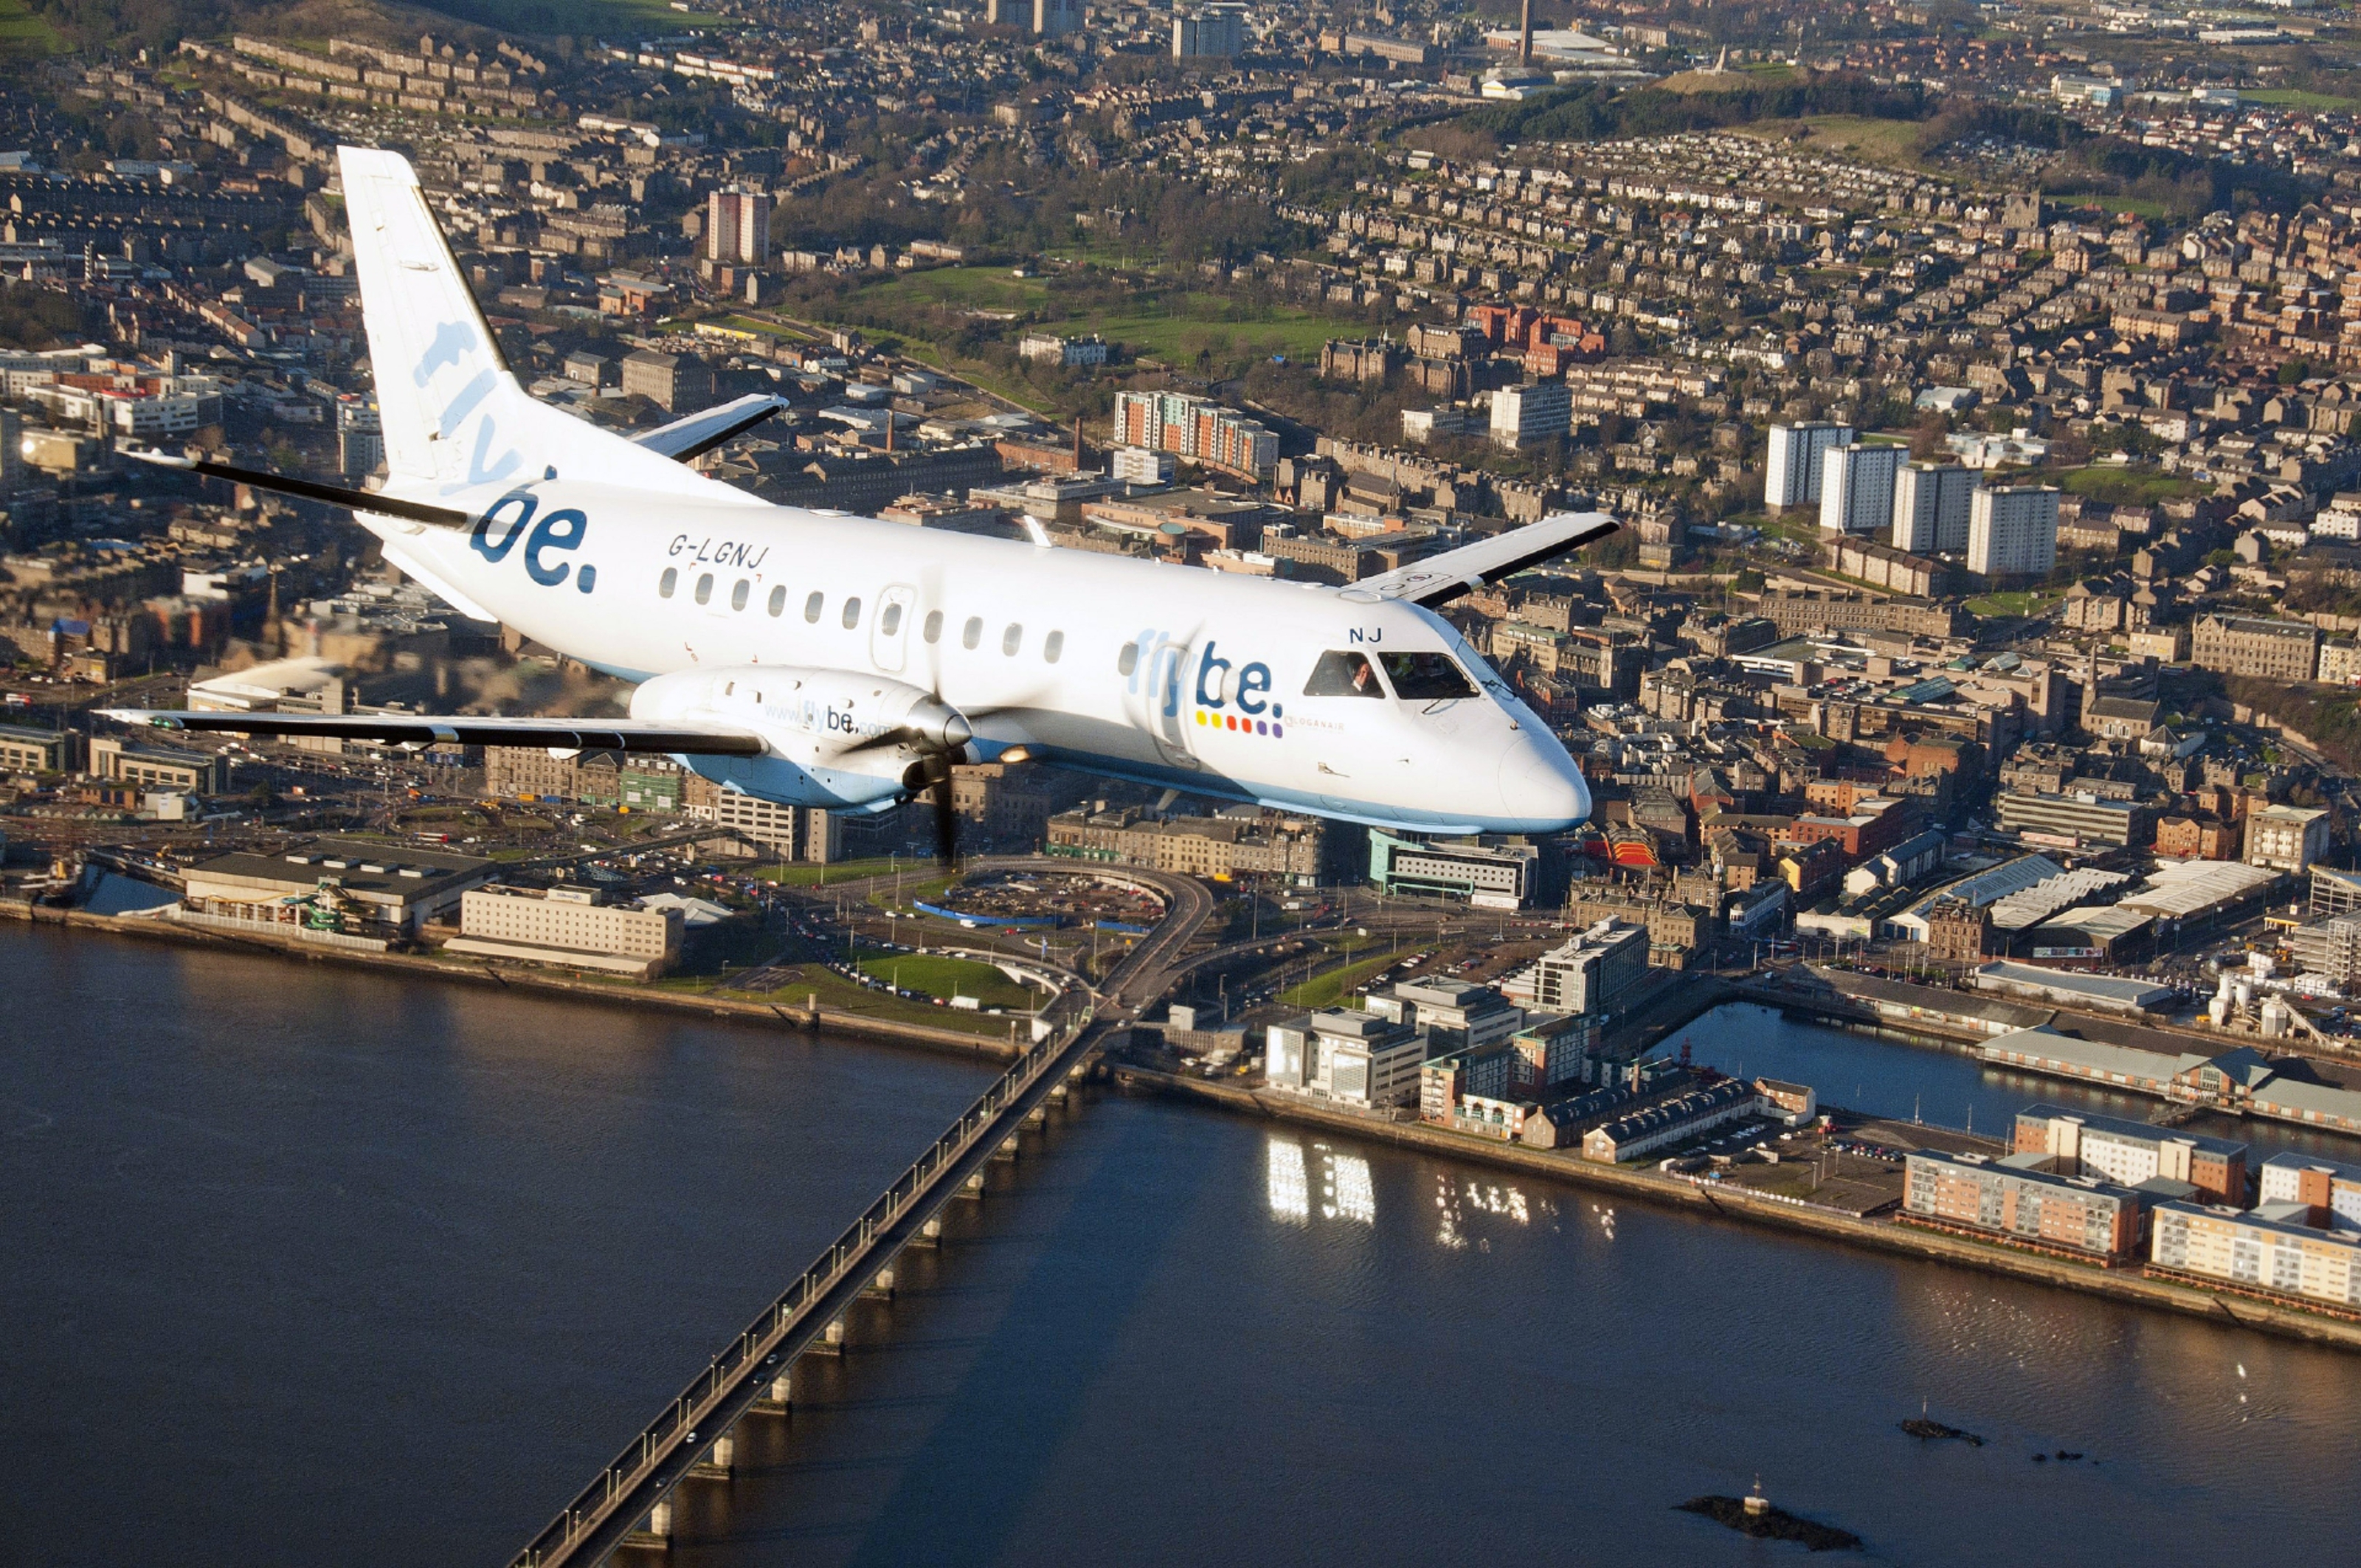 A Loganair Flybe aircraft over Dundee.